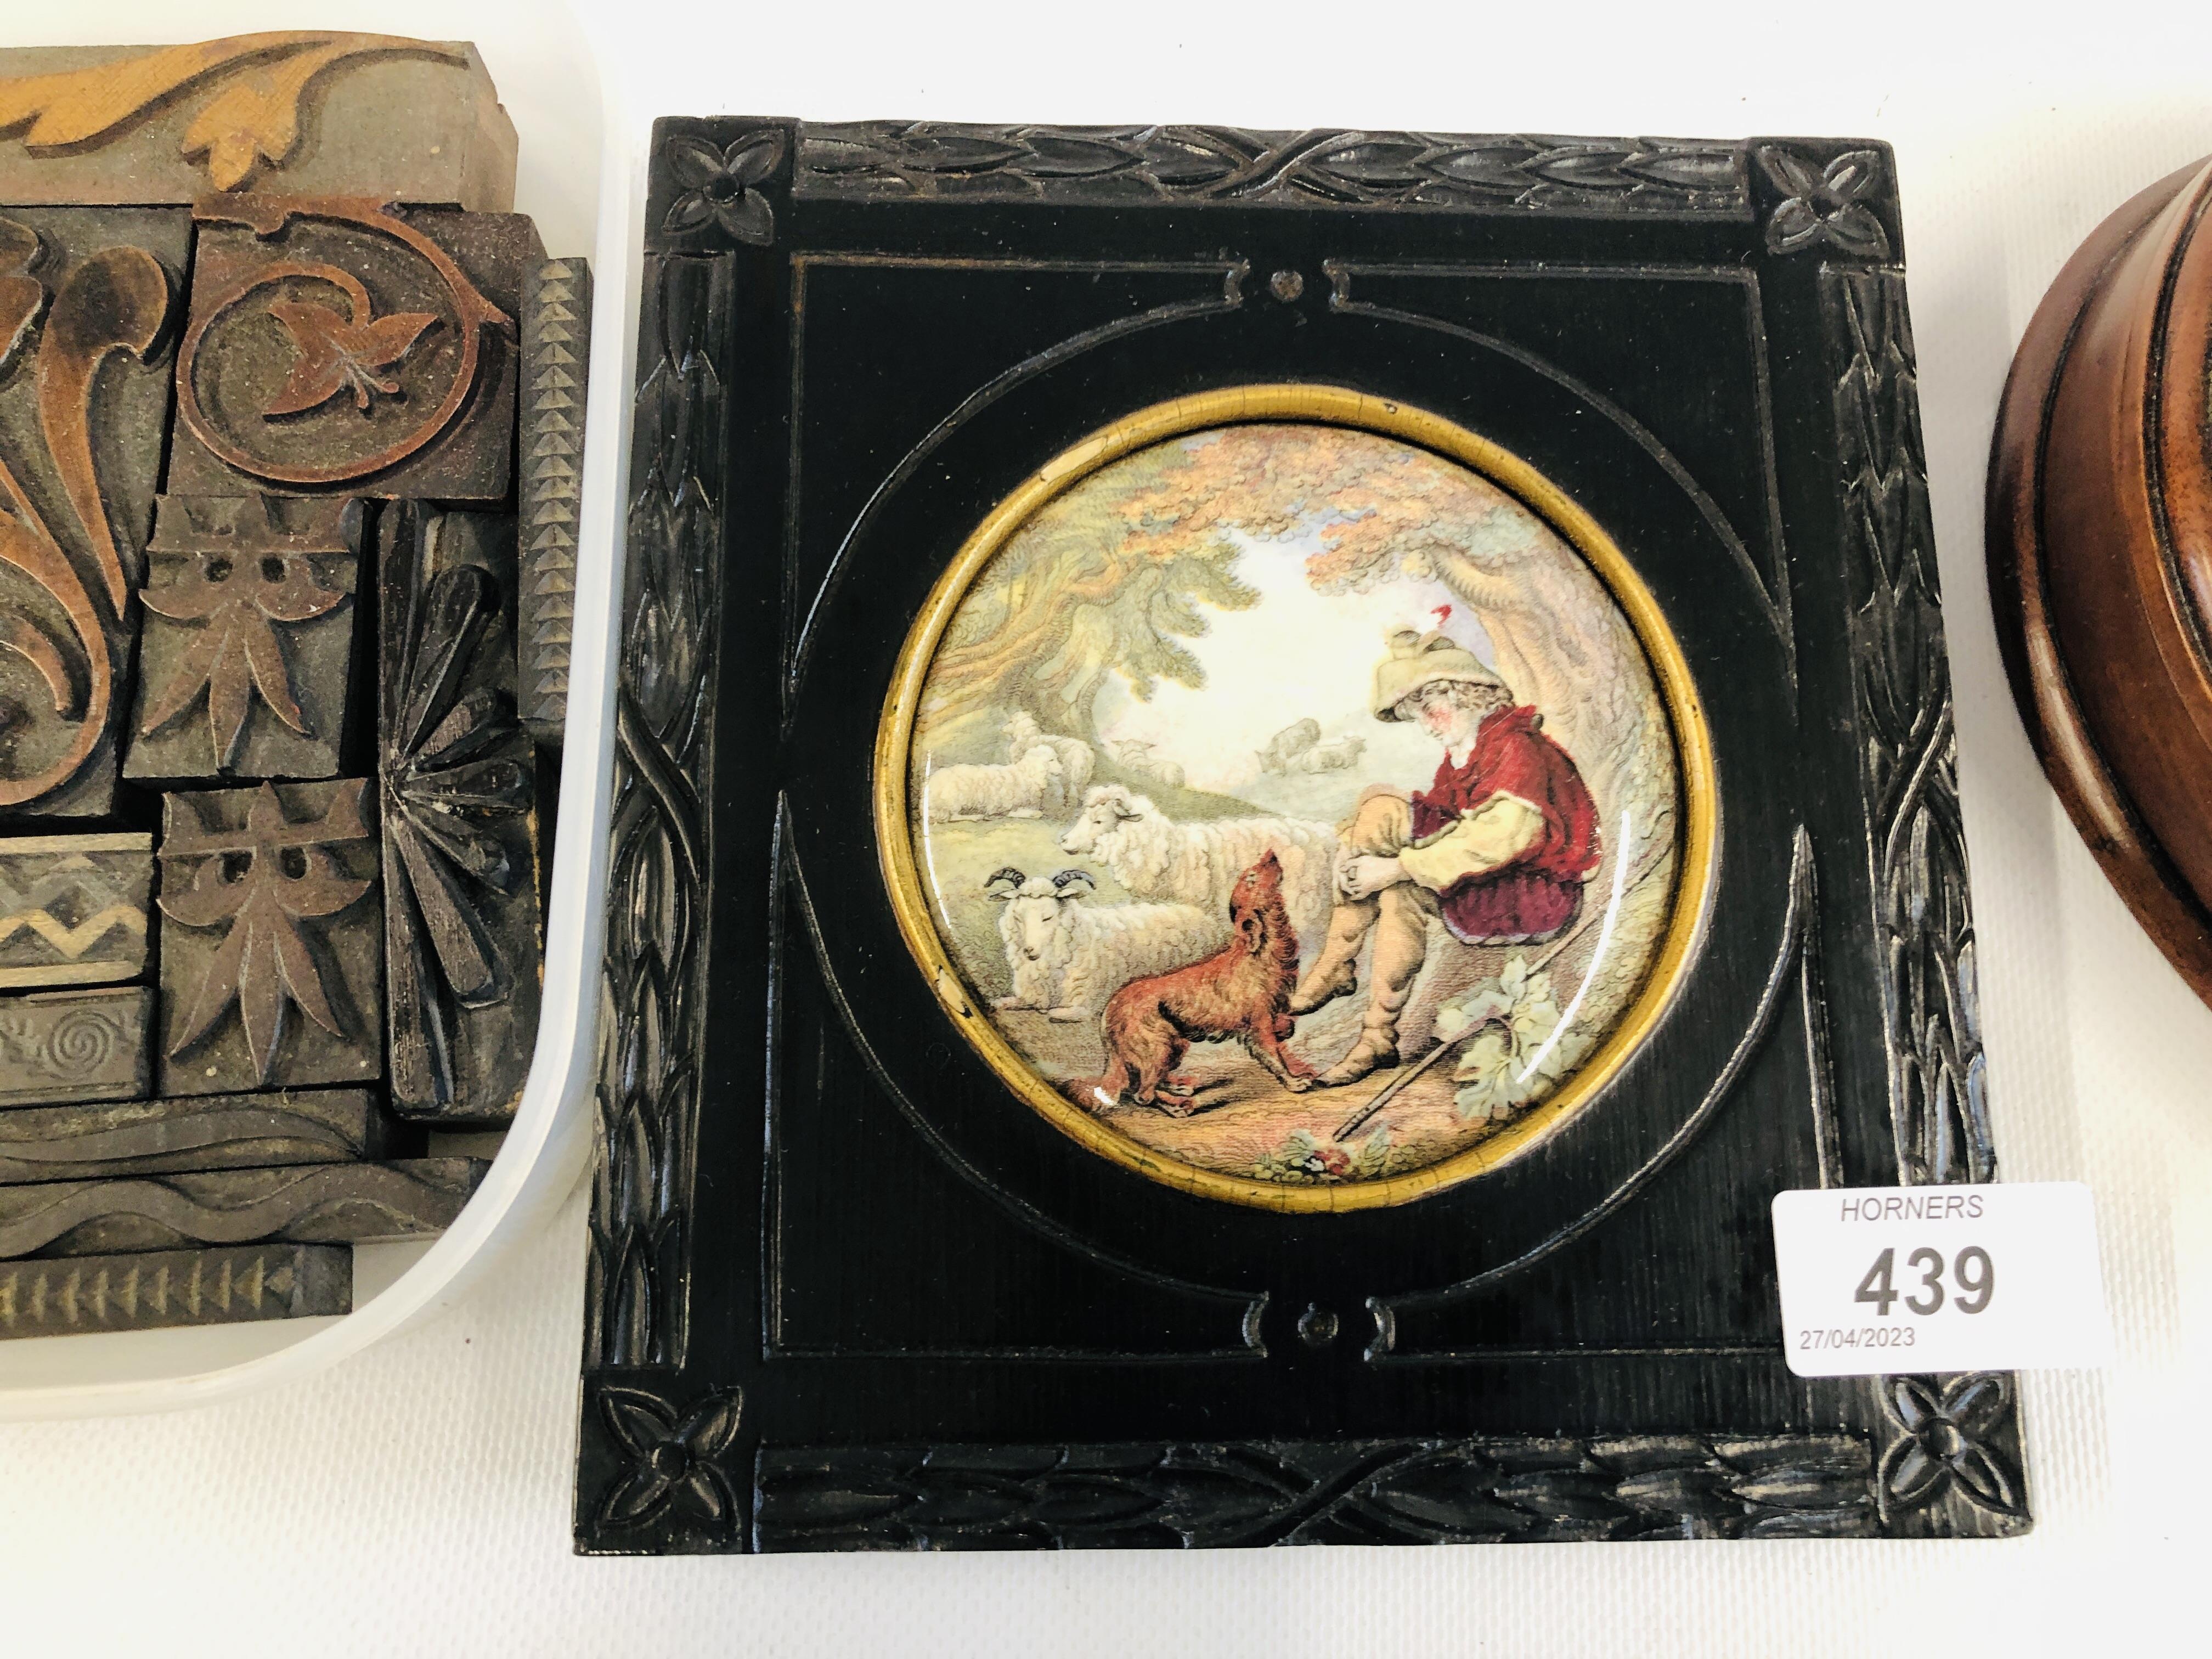 A VINTAGE FRAMED POT LID DEPICTING FARMING SCENE ALONG WITH A HORSESHOE CRIBBAGE BOX AND CONTENTS - Image 2 of 6